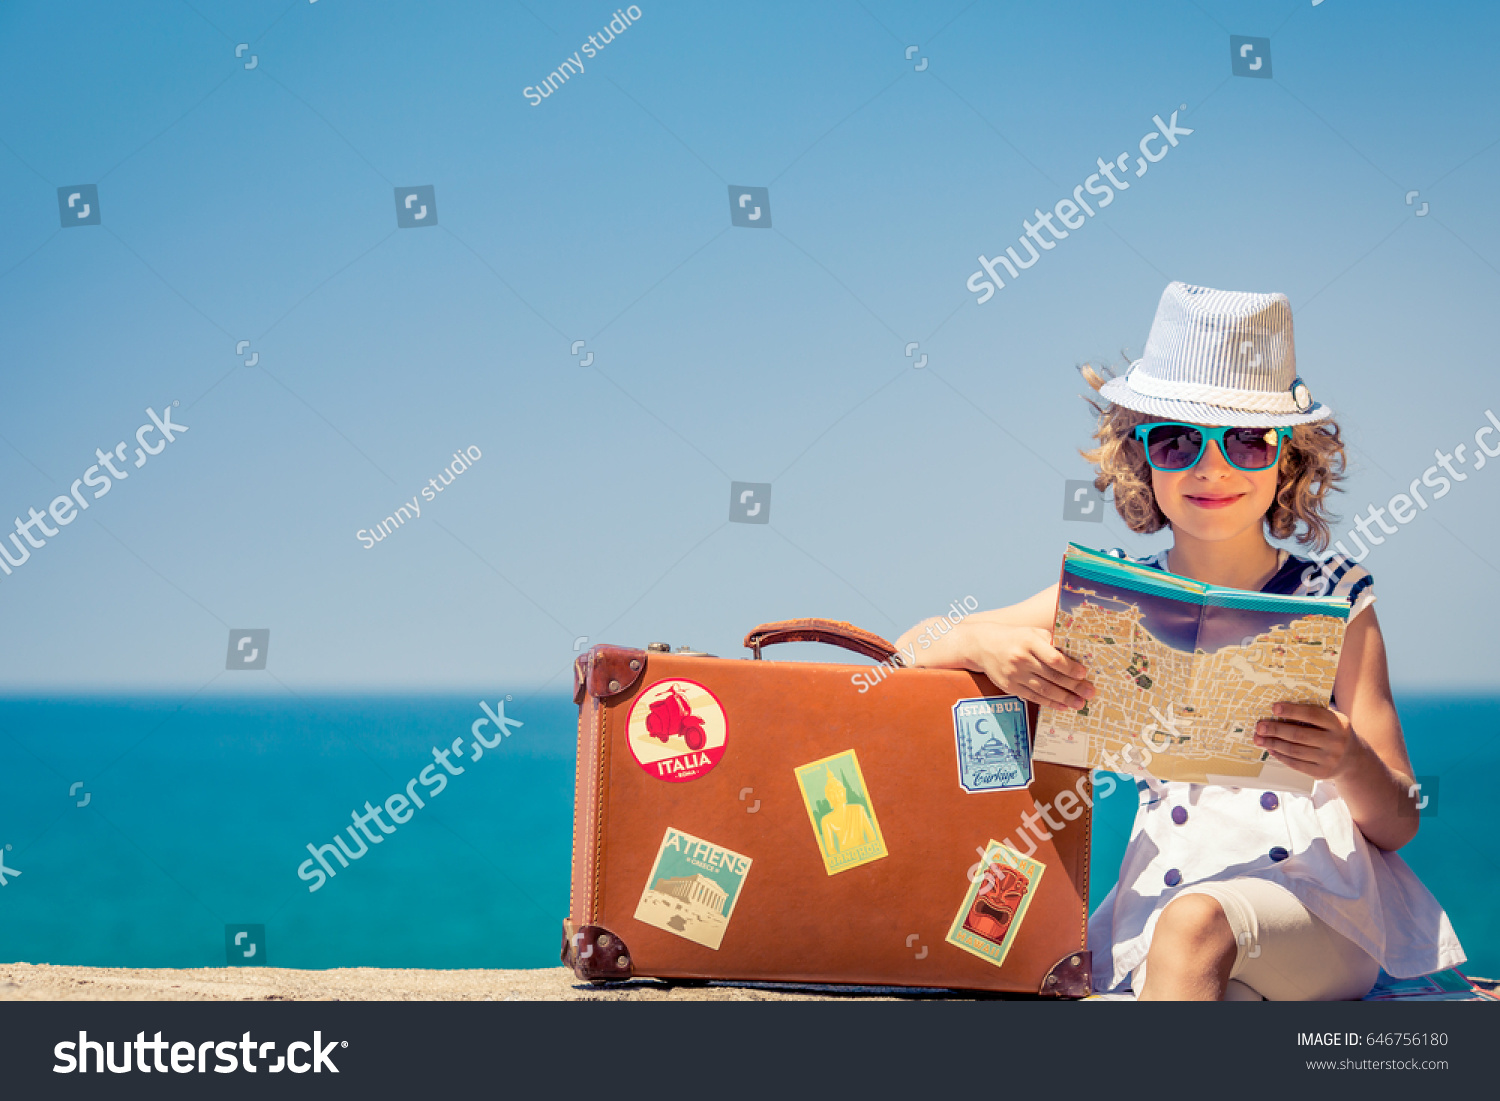 Happy child with vintage suitcase and city map. Kid having fun on summer vacation. Travel and adventure concept #646756180